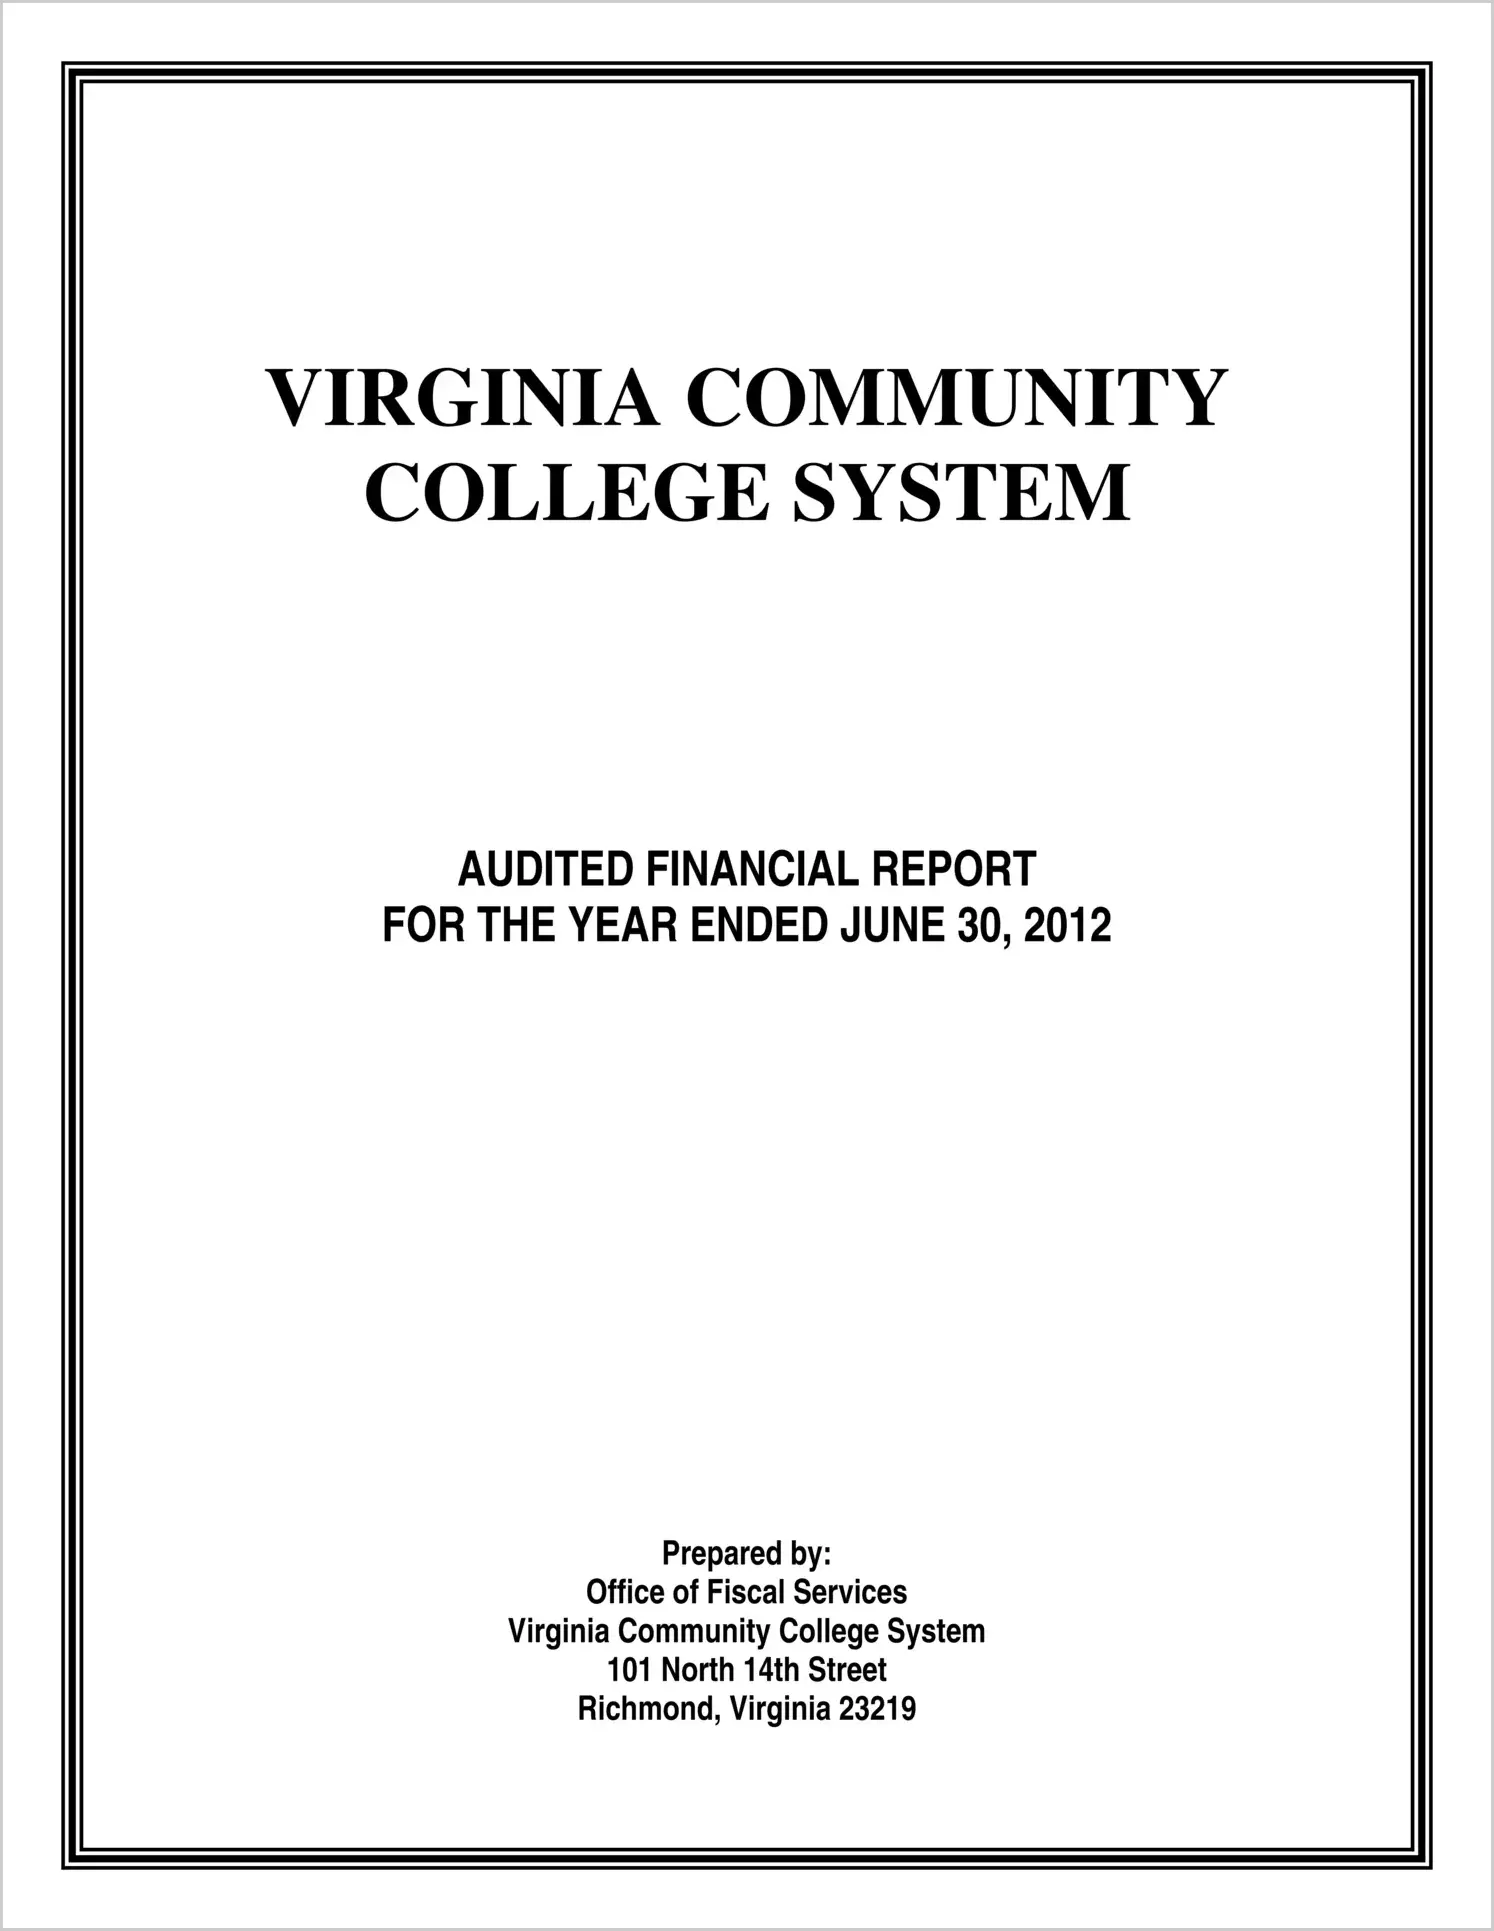 Virginia Community College System Financial Statements for the year ended June 30, 2012